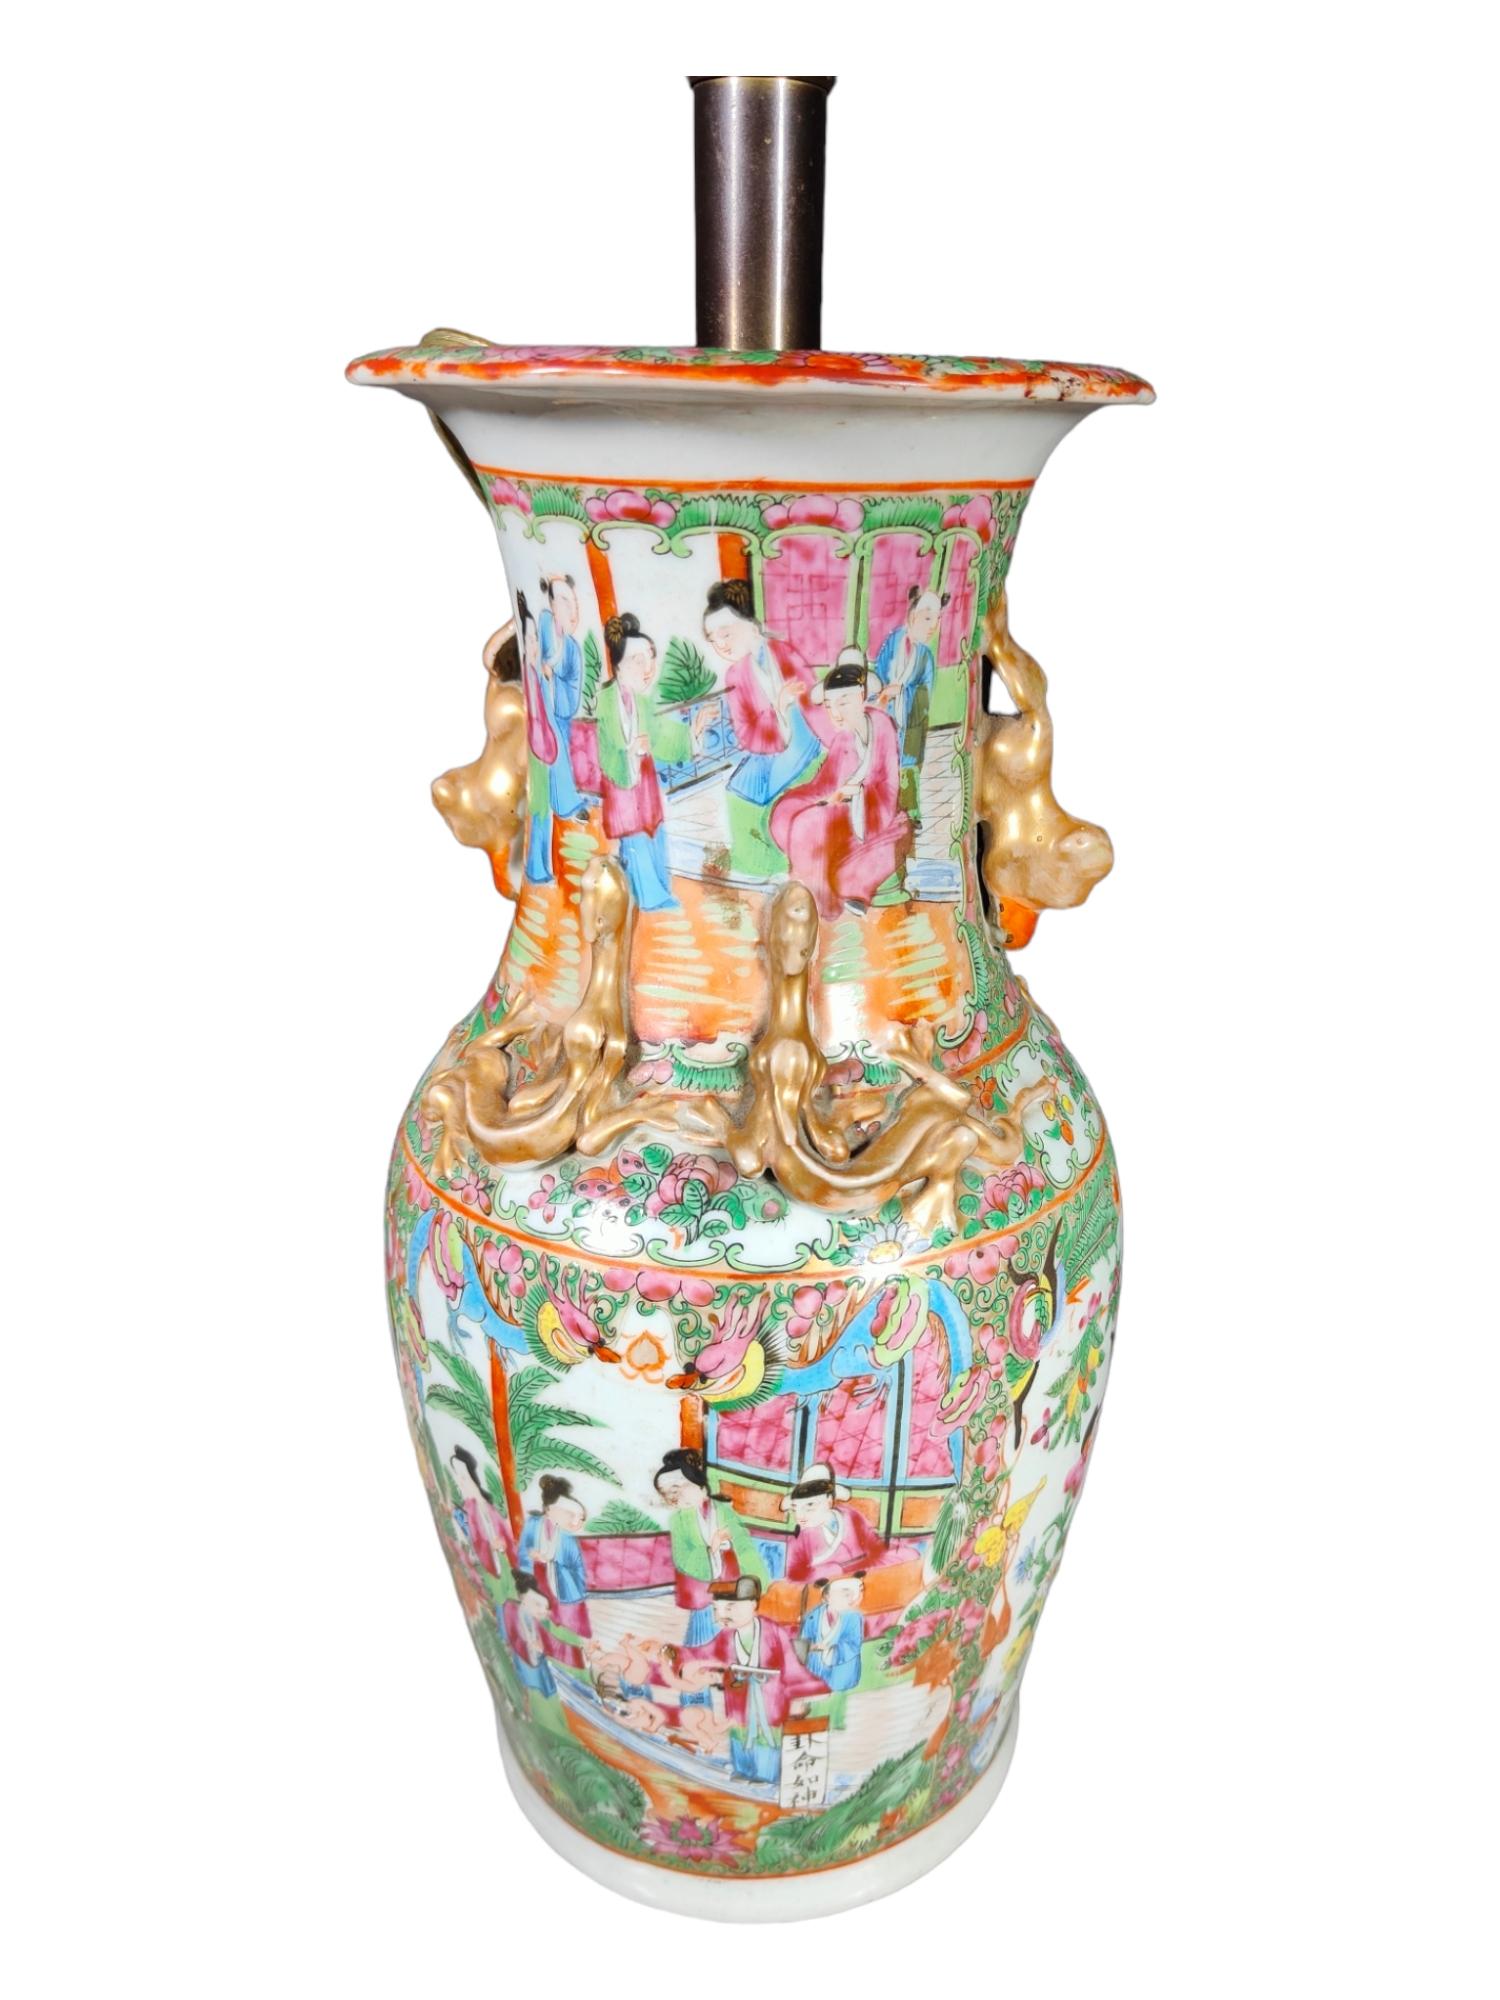 Canton XIX Century Chinese Vase
CHINESE VASE CANTON XIX CENTURY CHINESE VASE XIX CENTURY FOR EXPORT TRANSFORMED INTO A LAMP GOOD CONDITION OF CONSERVATION MEASURES 37 CM HIGH